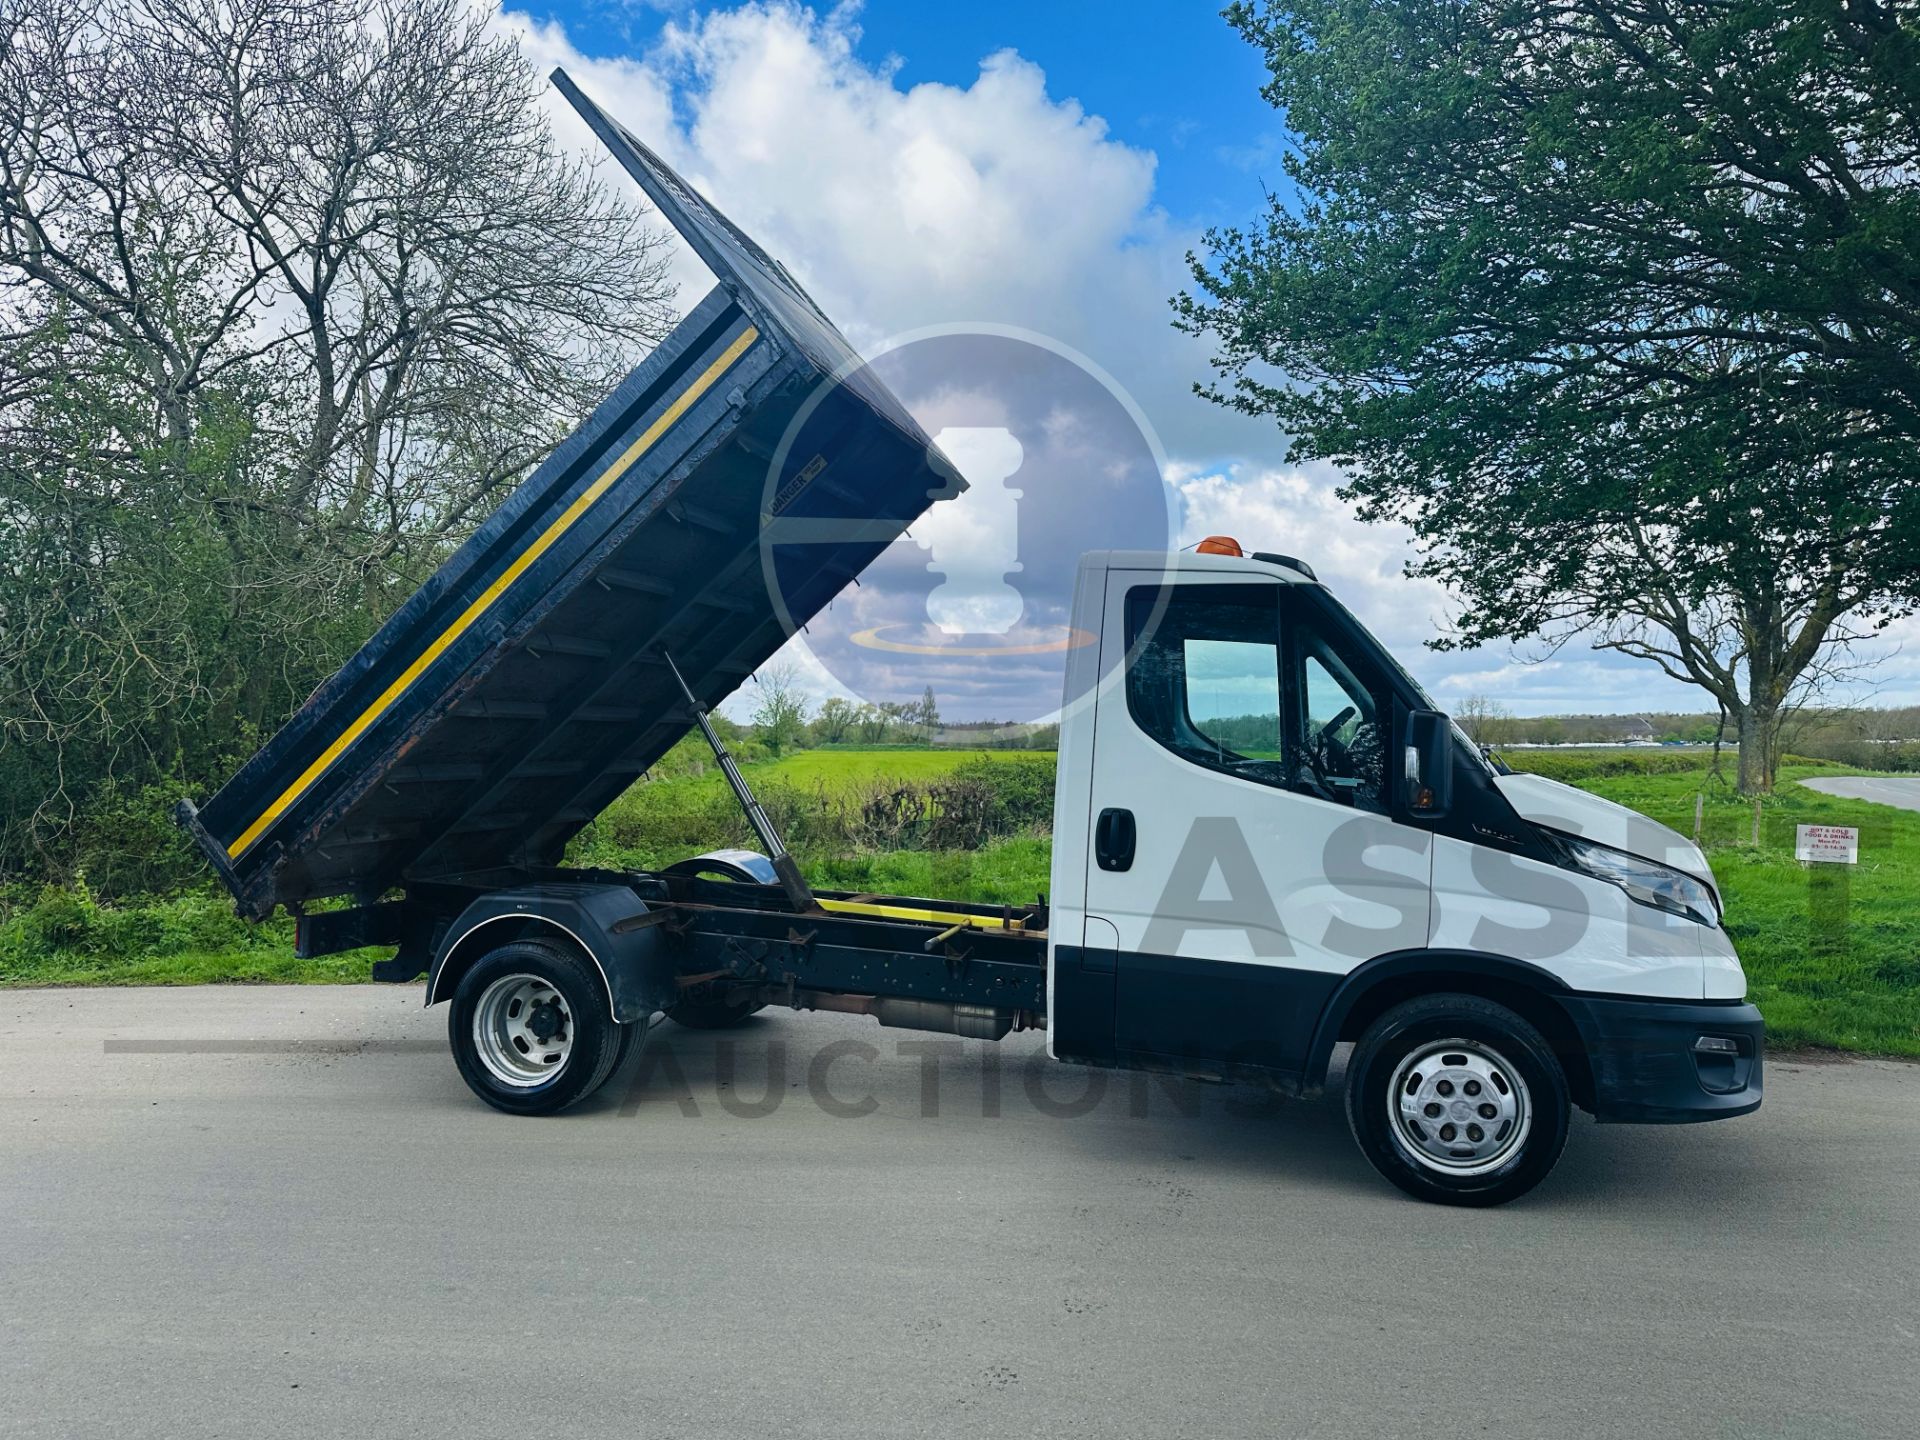 (ON SALE) IVECO DAILY 35C14 *SINGLE CAB - TIPPER TRUCK* (2020 - EURO 6) 2.3 DIESEL - (3500 KG) - Image 12 of 28